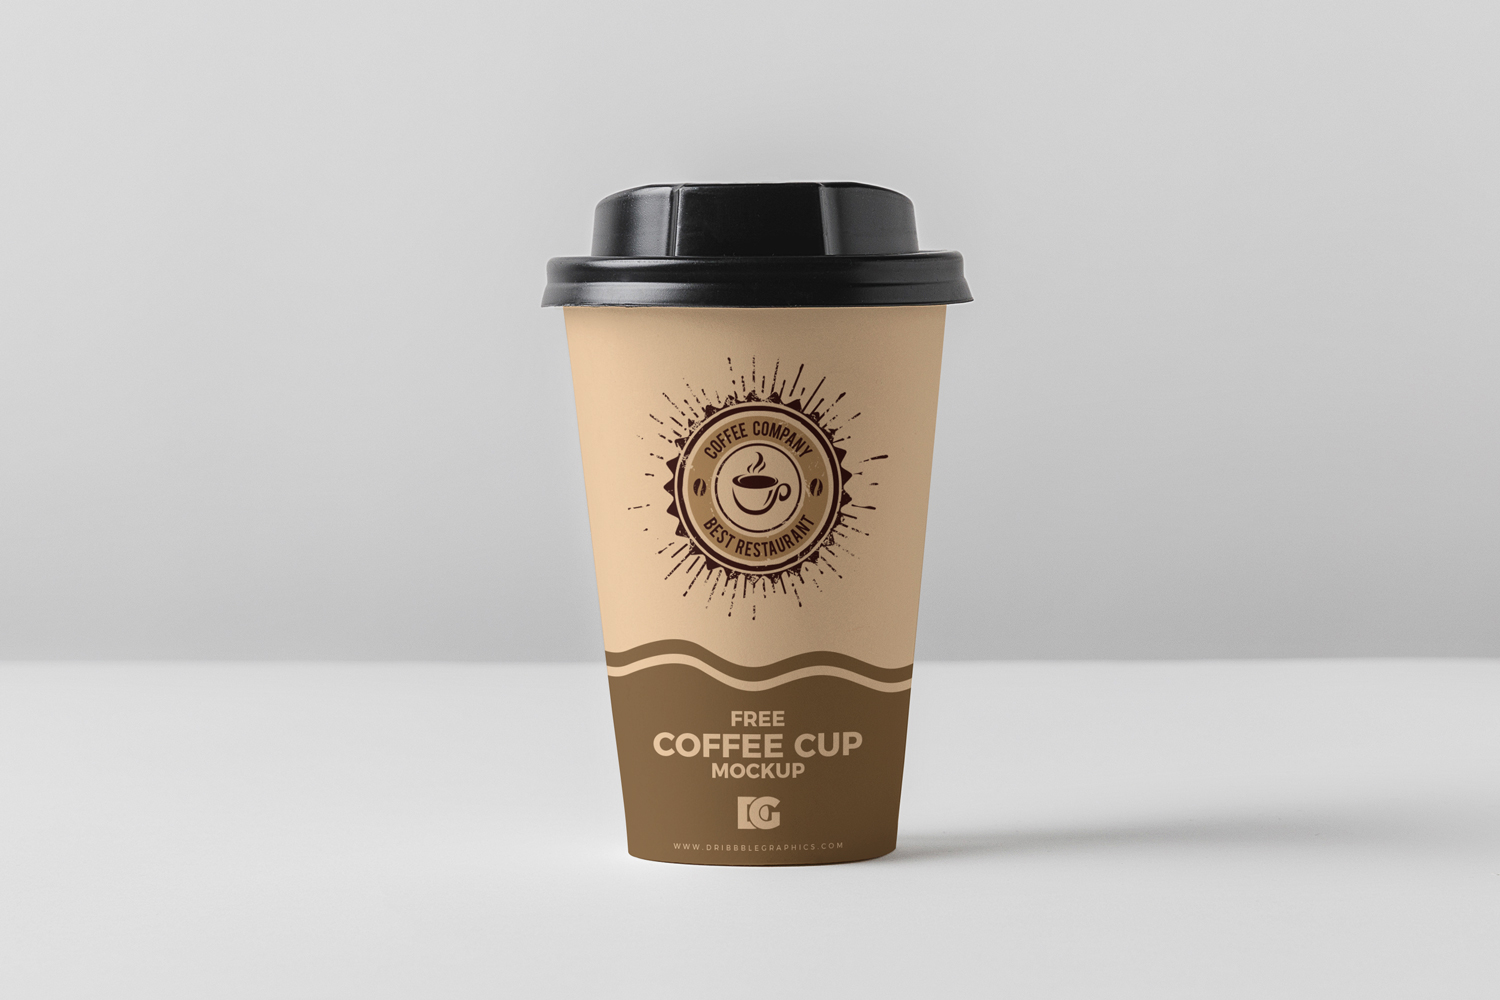 Free Coffee Cup Mockup PSD For Branding 2018 | Dribbble Graphics